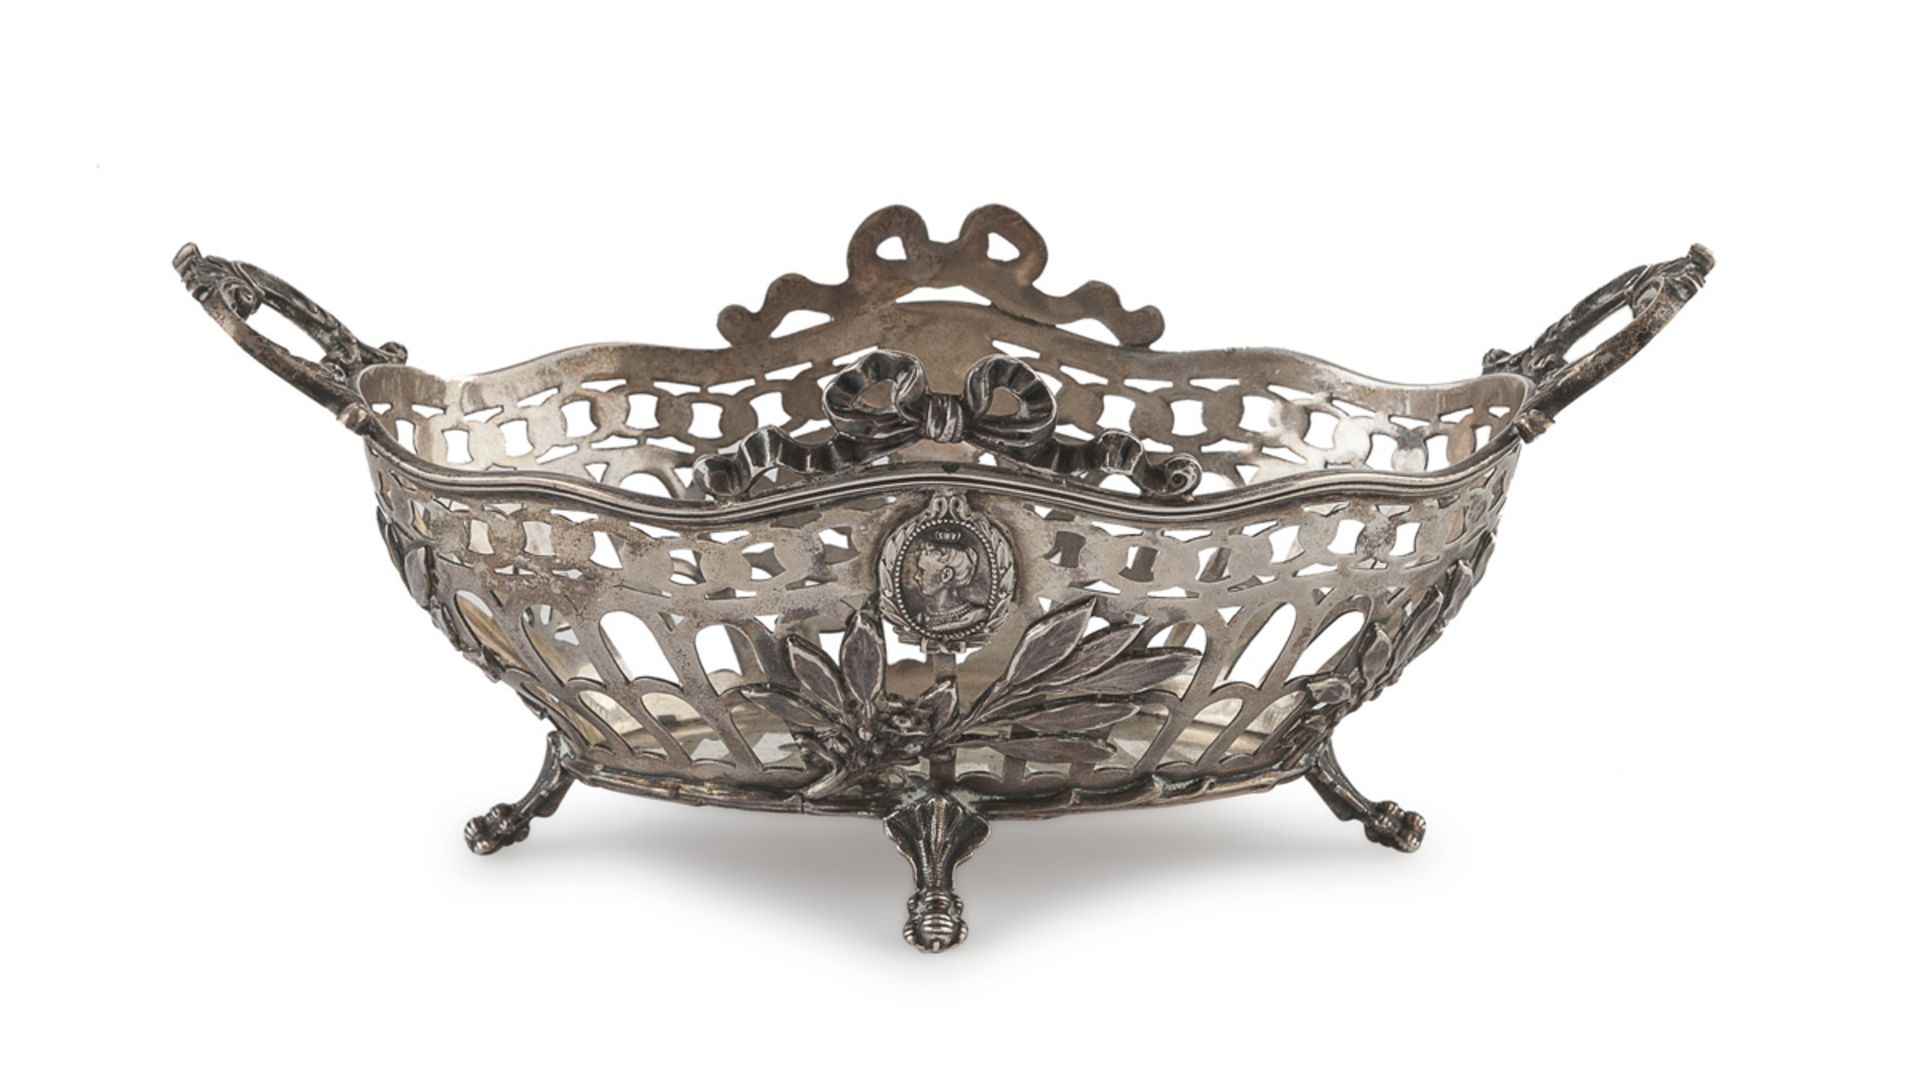 SILVER BASKET - PUNCH HOLLAND 19TH CENTURY